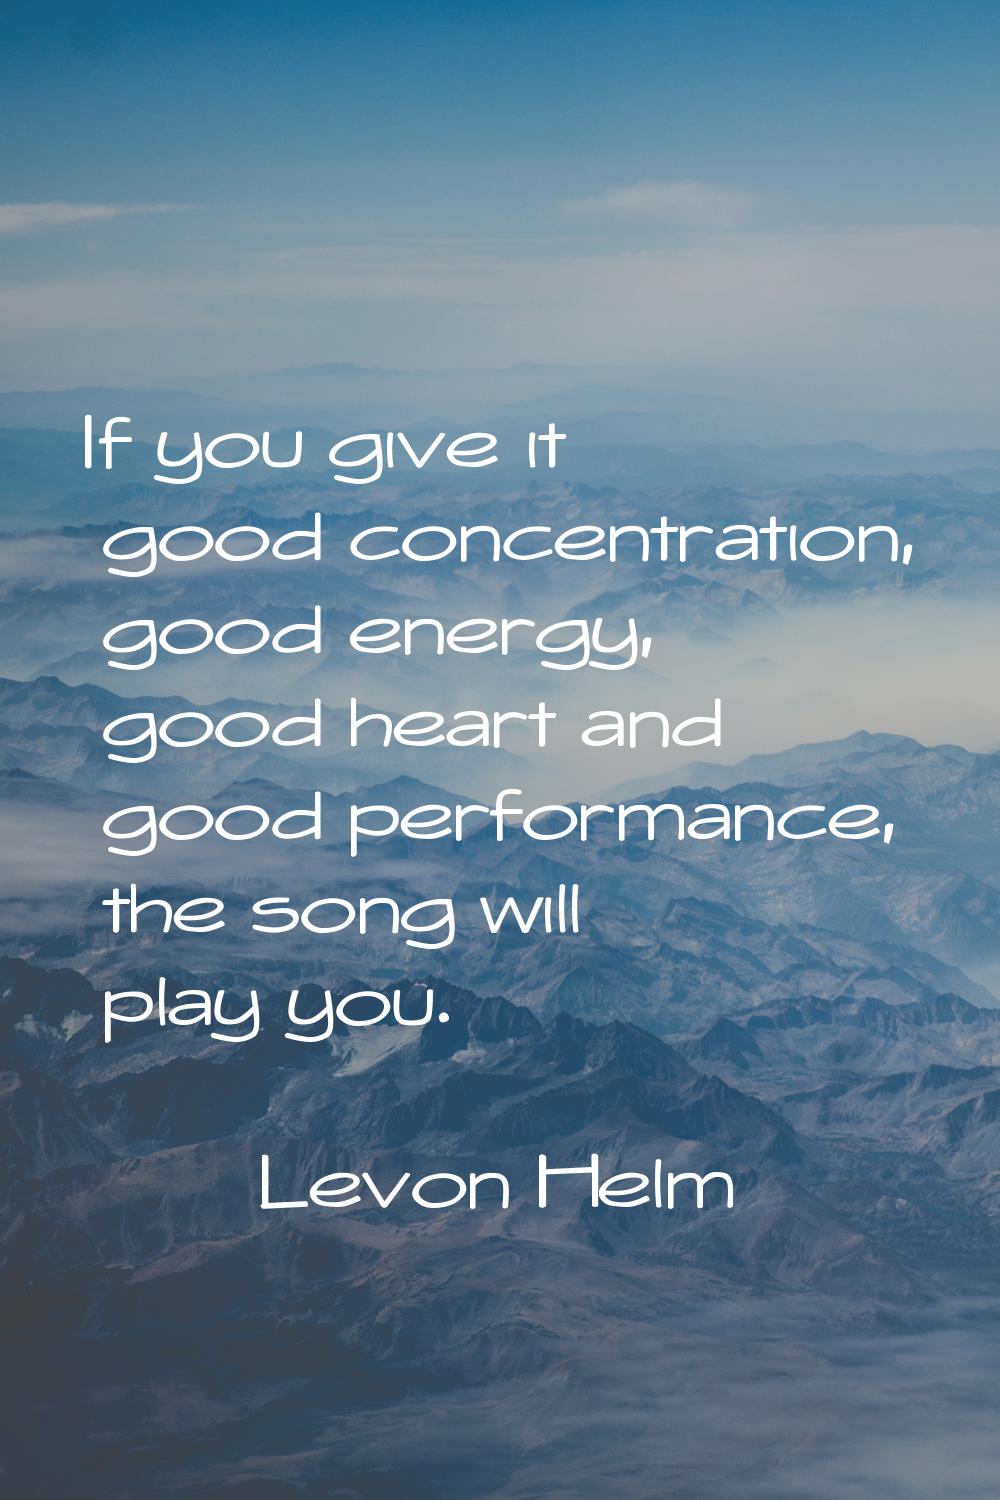 If you give it good concentration, good energy, good heart and good performance, the song will play